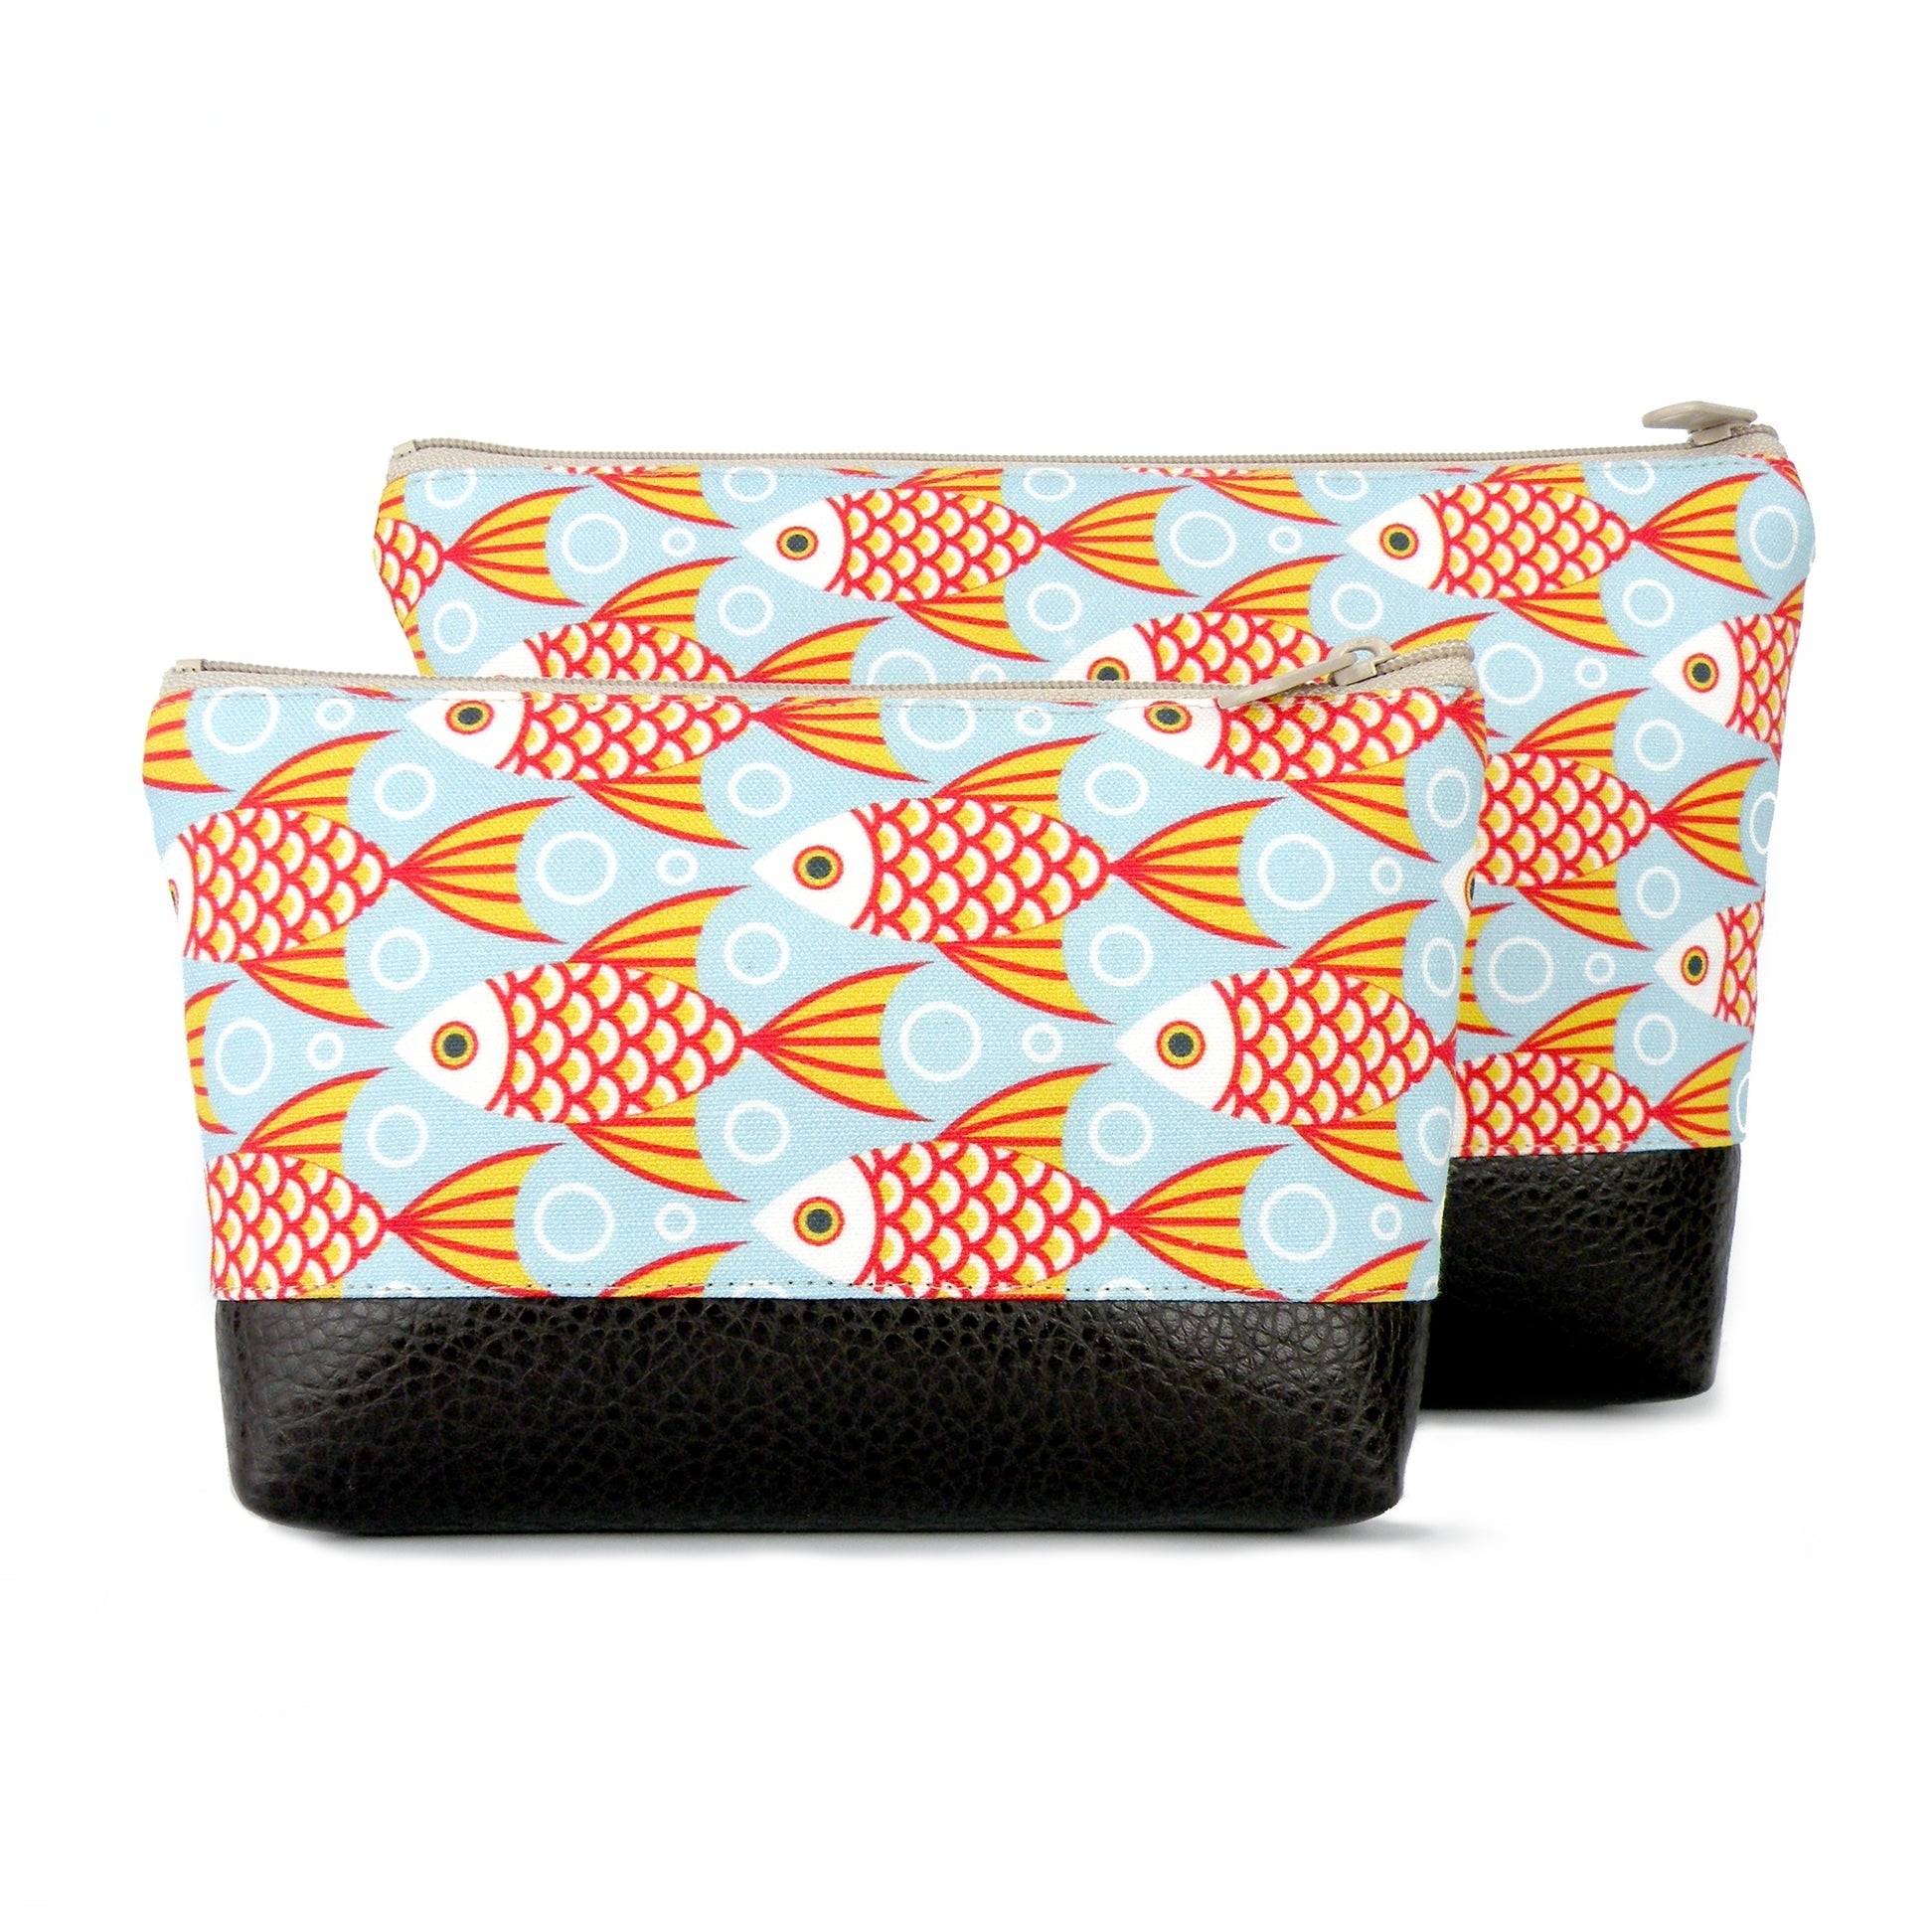 Small Cosmetic Clutch in Goldfish Linen